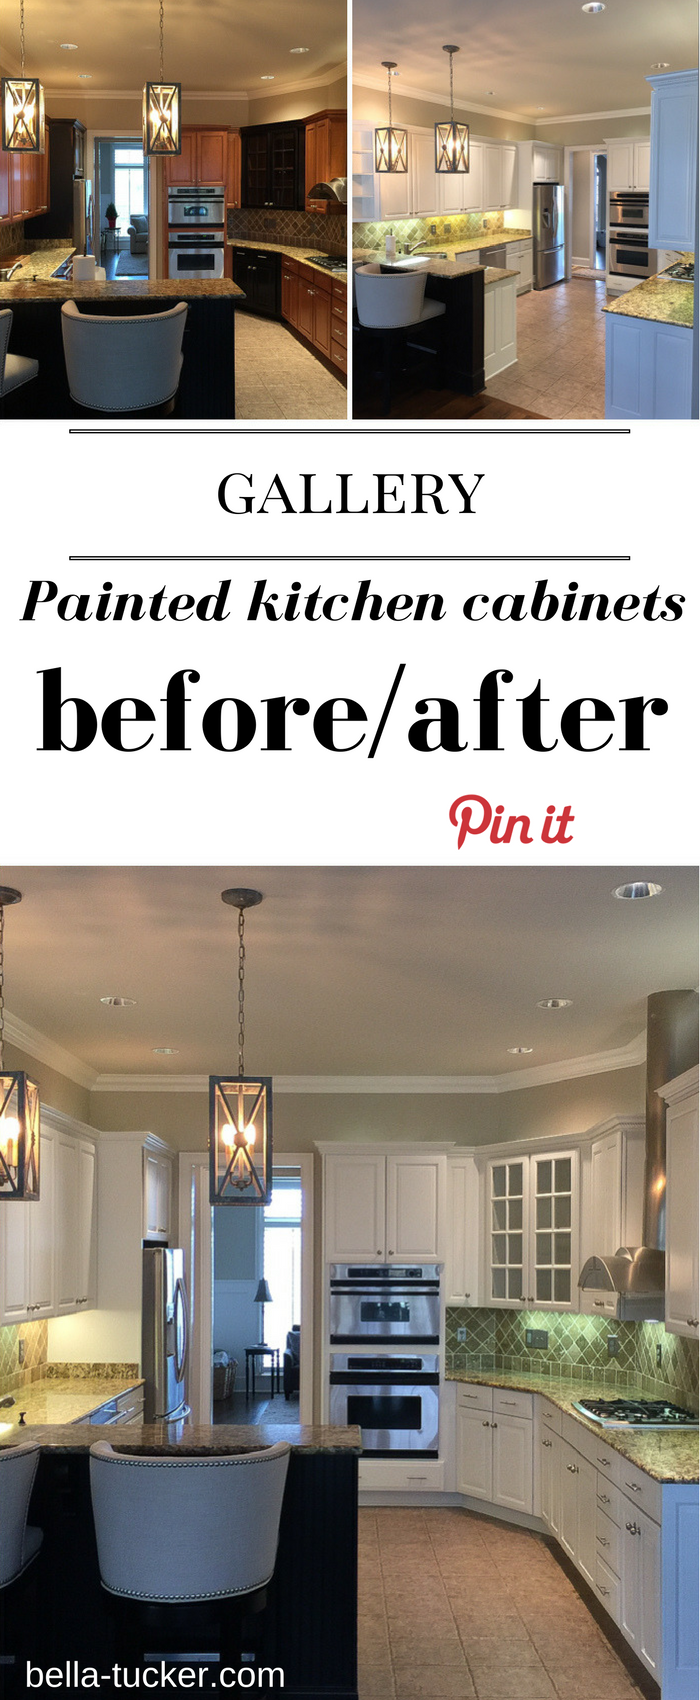 painted kitchen cabinets before and after gallery- Bella Tucker